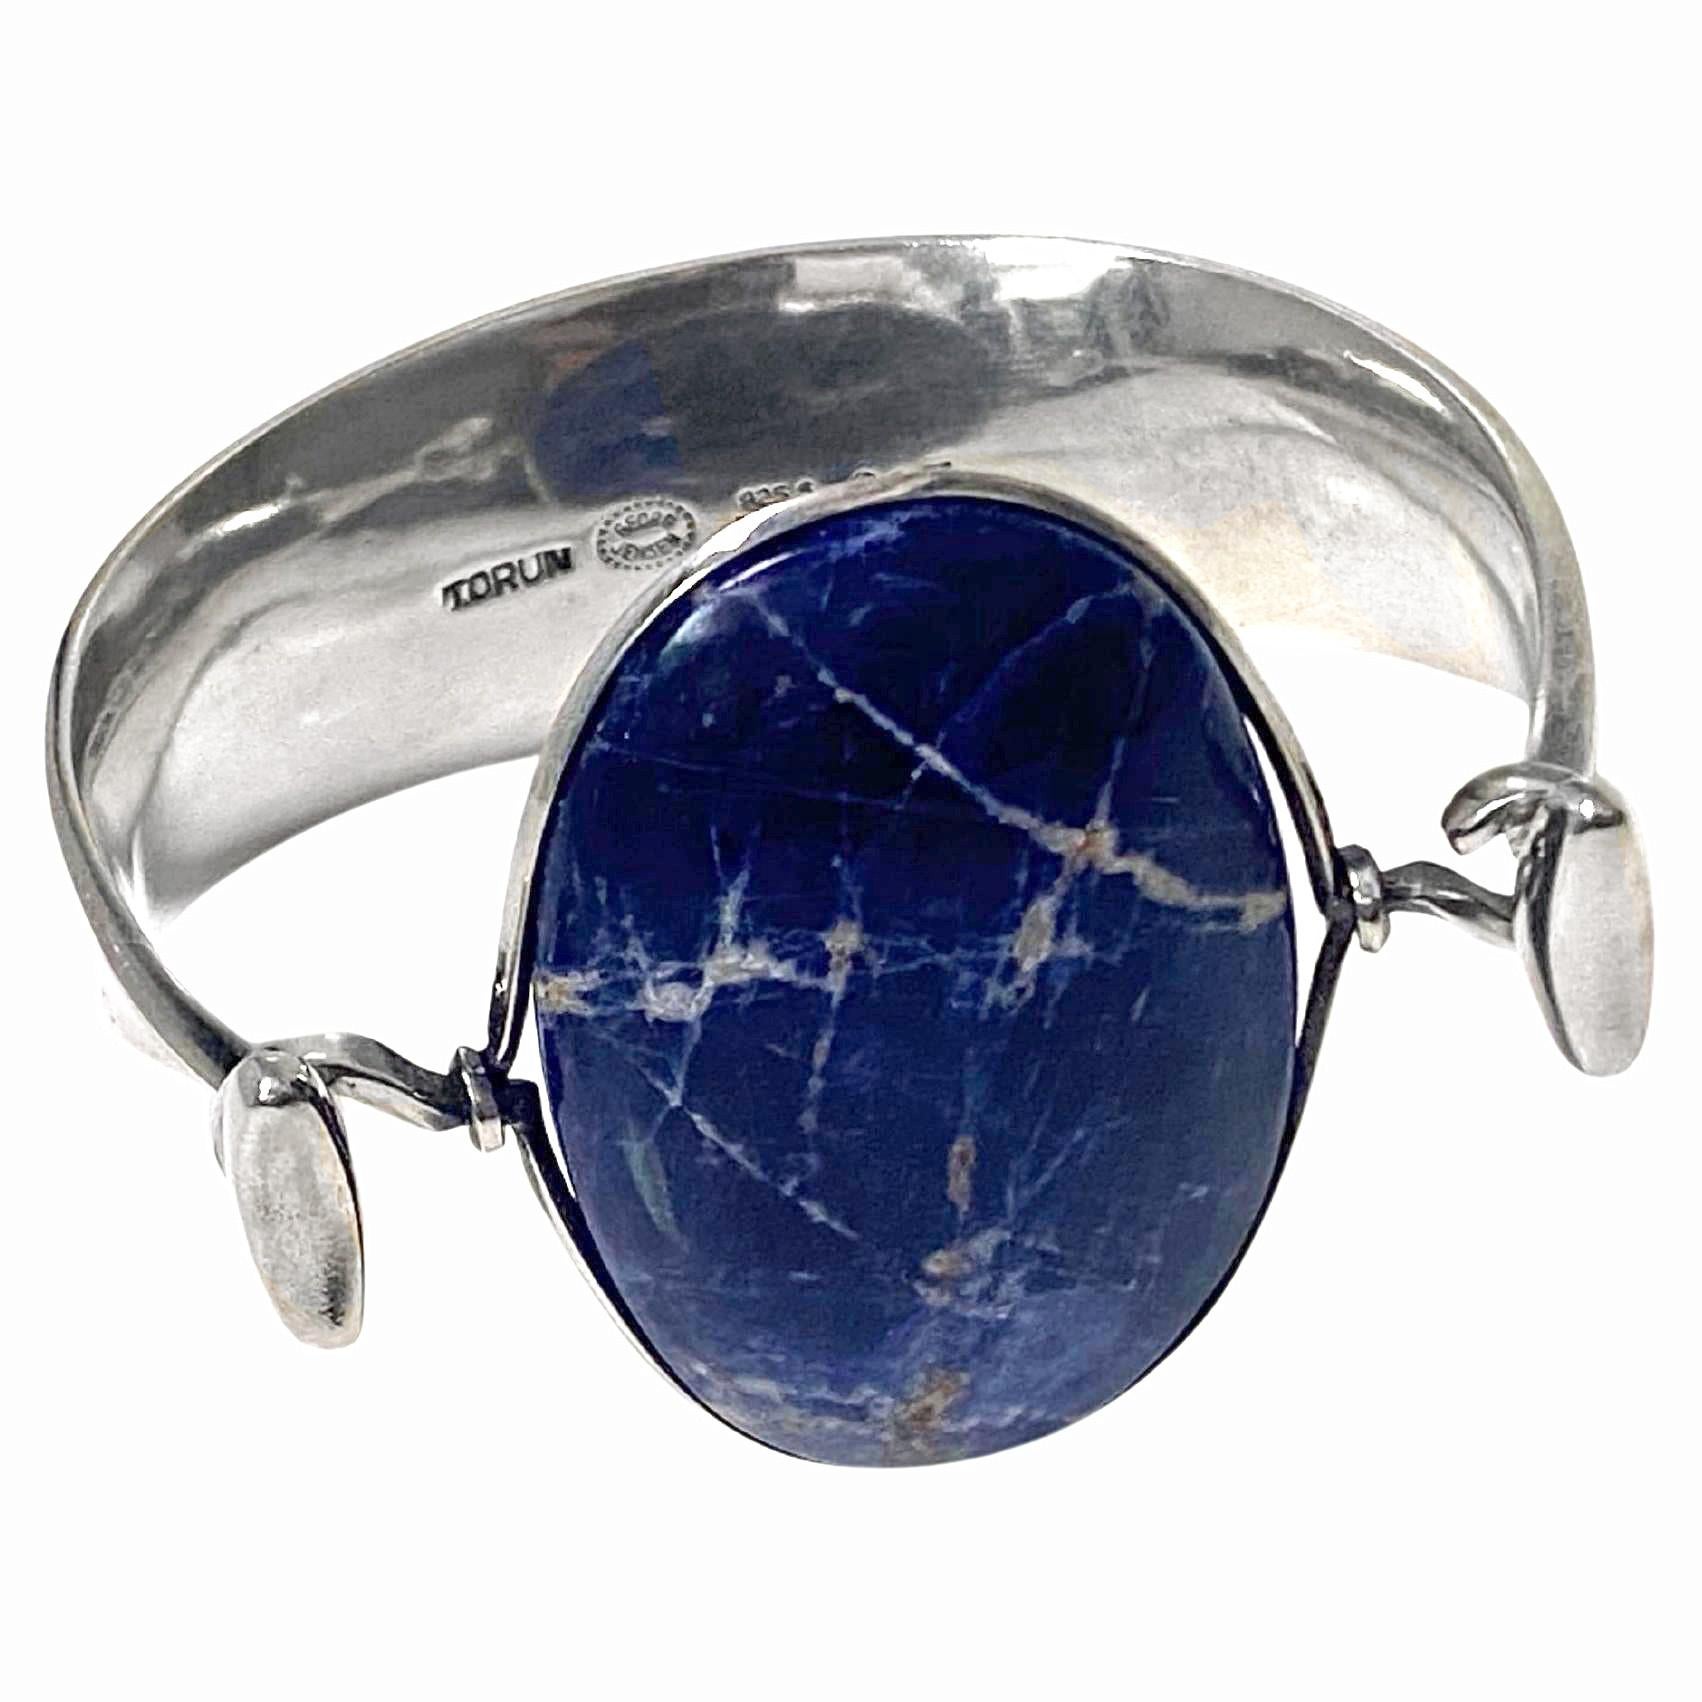 Georg Jensen Bangle with Sodalite model # 203 Designed by Vivianna Torun Bülow-Hübe C.1969. Fits most wrists up to 6.5 - 7.0 inches, tension clamp opening. Cabochon polished sodalite gauges approximately: 4.50 x 3.00 cm. Stamped with: Georg Jensen